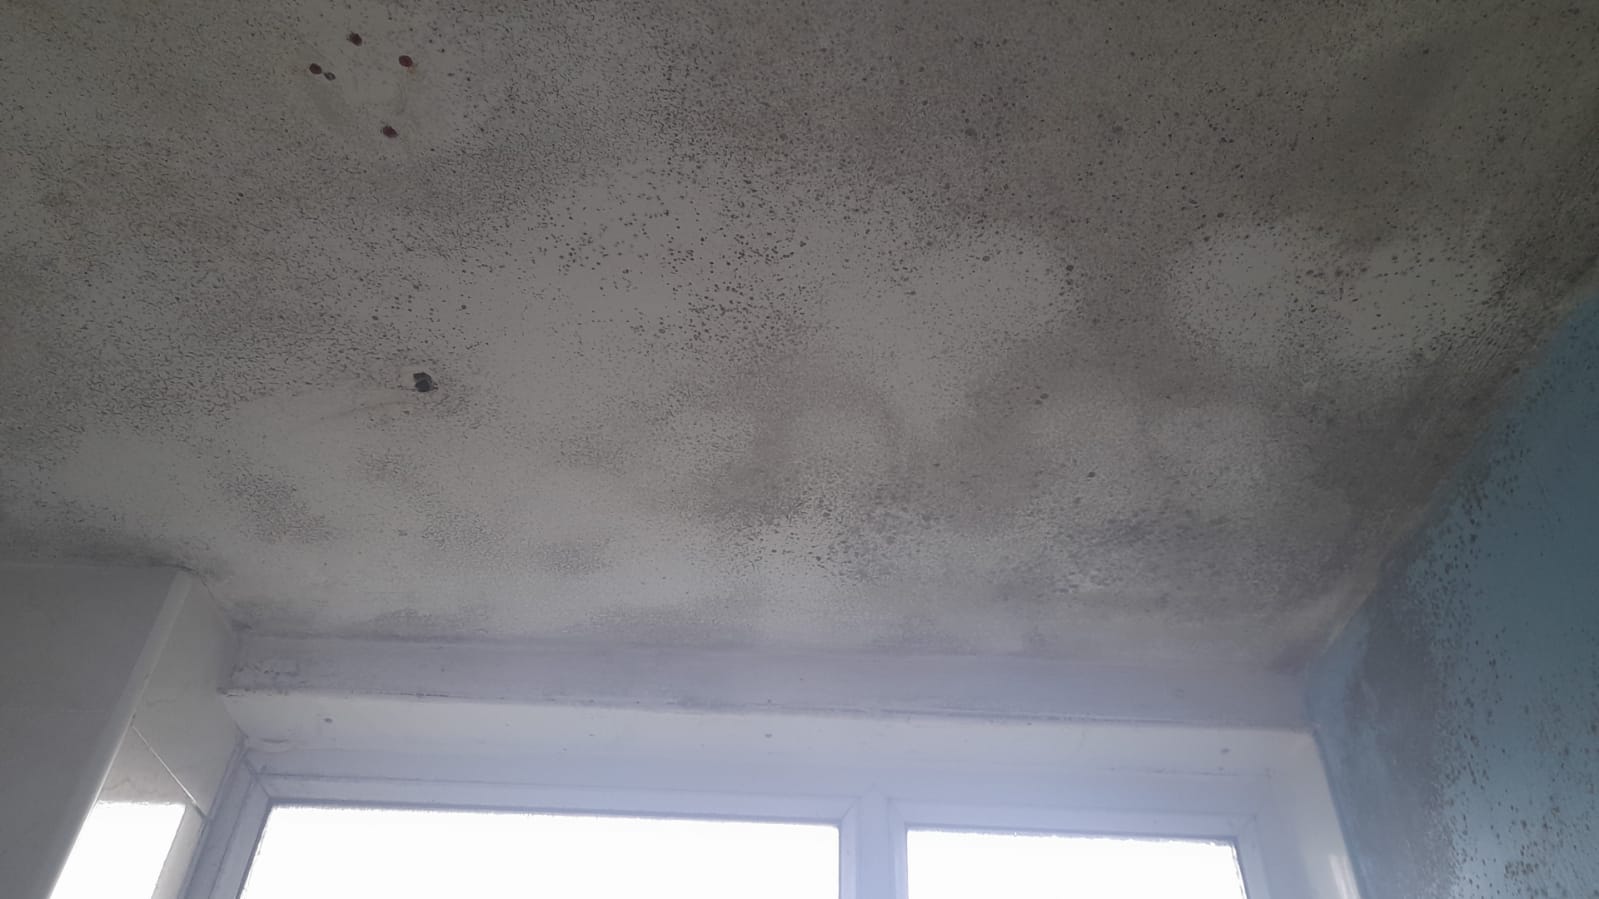 Damp and mould on a roof